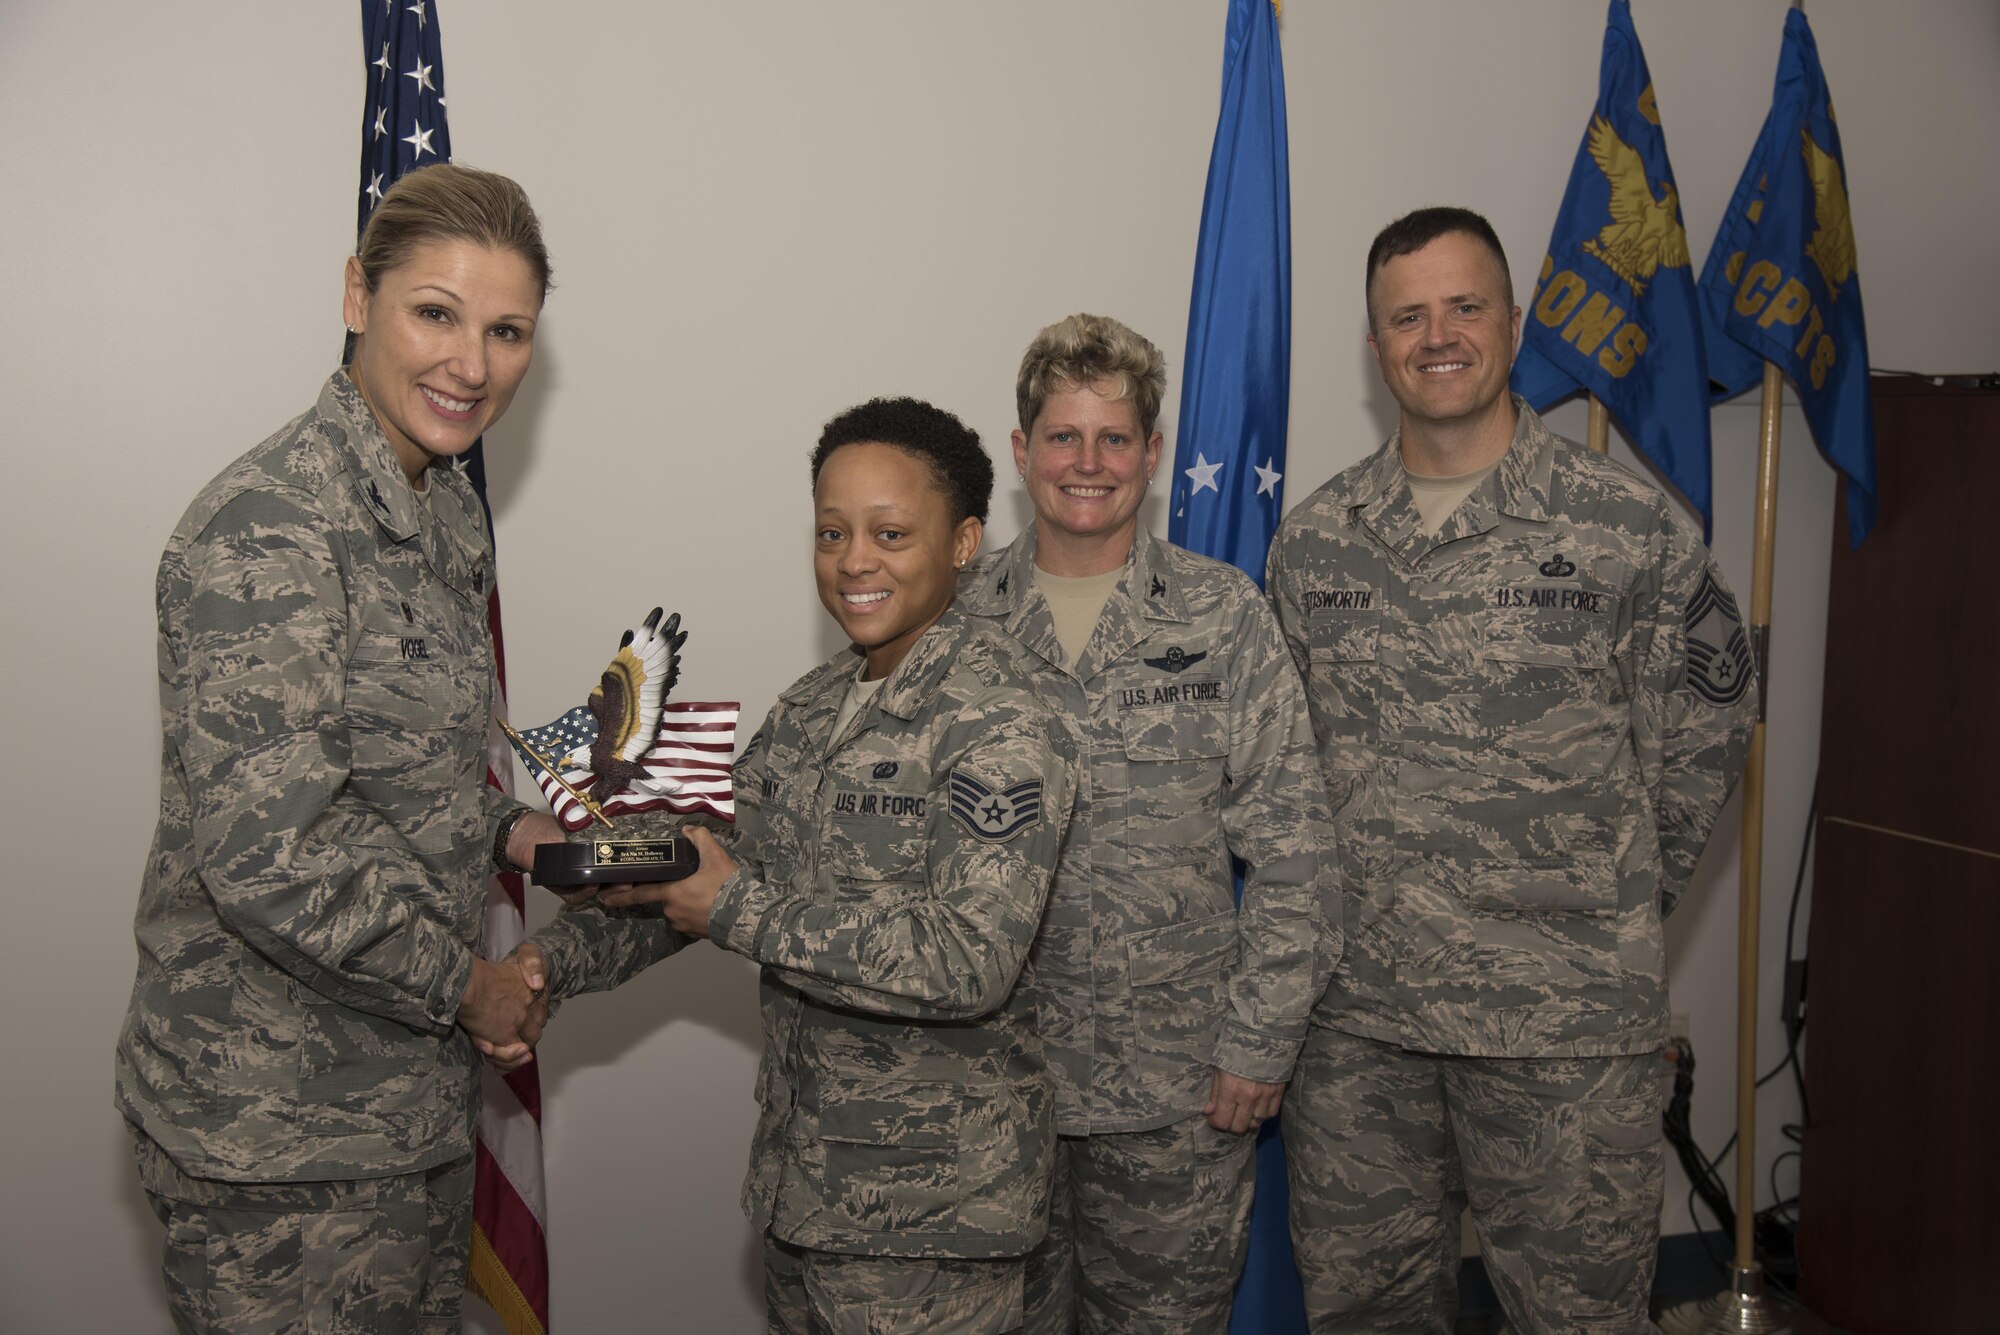 Col. April Vogel, commander of the 6th Air Mobility Wing, presents Staff Sgt. Nia Holloway, contract specialist assigned to the 6th Contracting Squadron, with an award for being named Air Mobility Command and Air Force’s 2016 Outstanding Contracting Enlisted Member of the Year May 11, 2017, at MacDill Air Force Base, Fla. Holloway received these awards for her outstanding performance as a contract specialist during the year of 2016. (U.S. Air Force photo by Airman 1st Class Adam R. Shanks) 